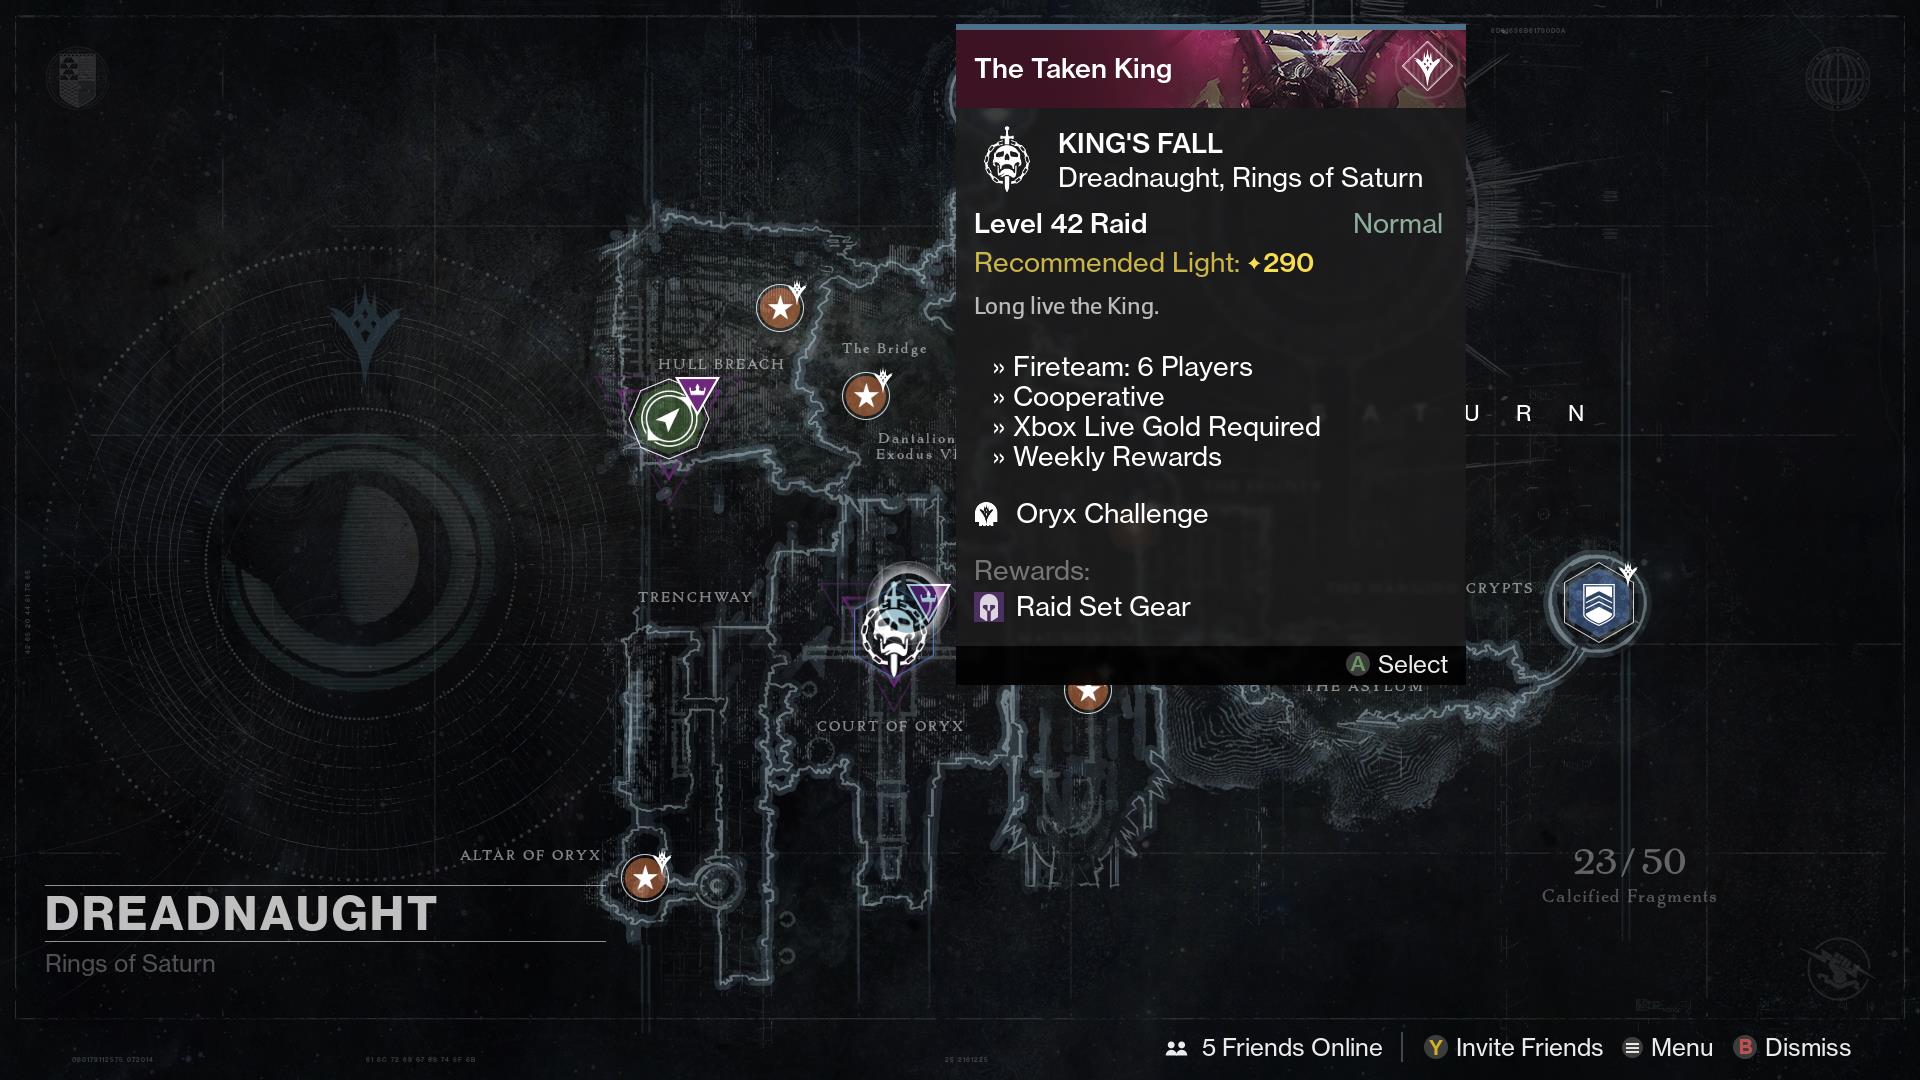 Image for Destiny weekly reset for September 6 – Court of Oryx, Nightfall, Prison of Elders changes detailed